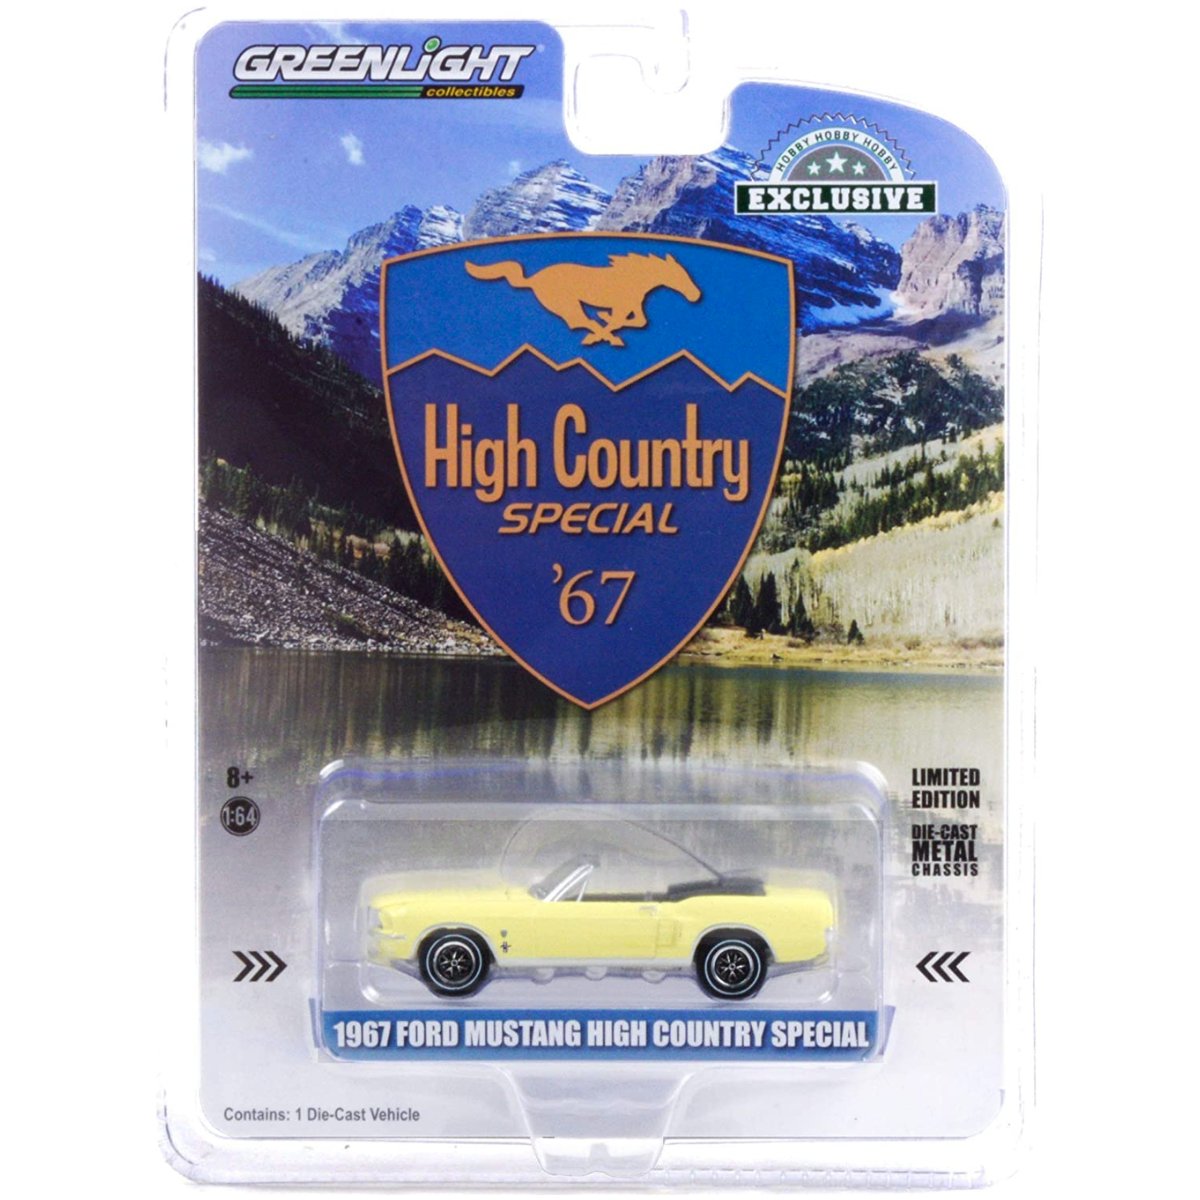 Greenlight 1967 Ford Mustang High Country Special - 1:64 Scale